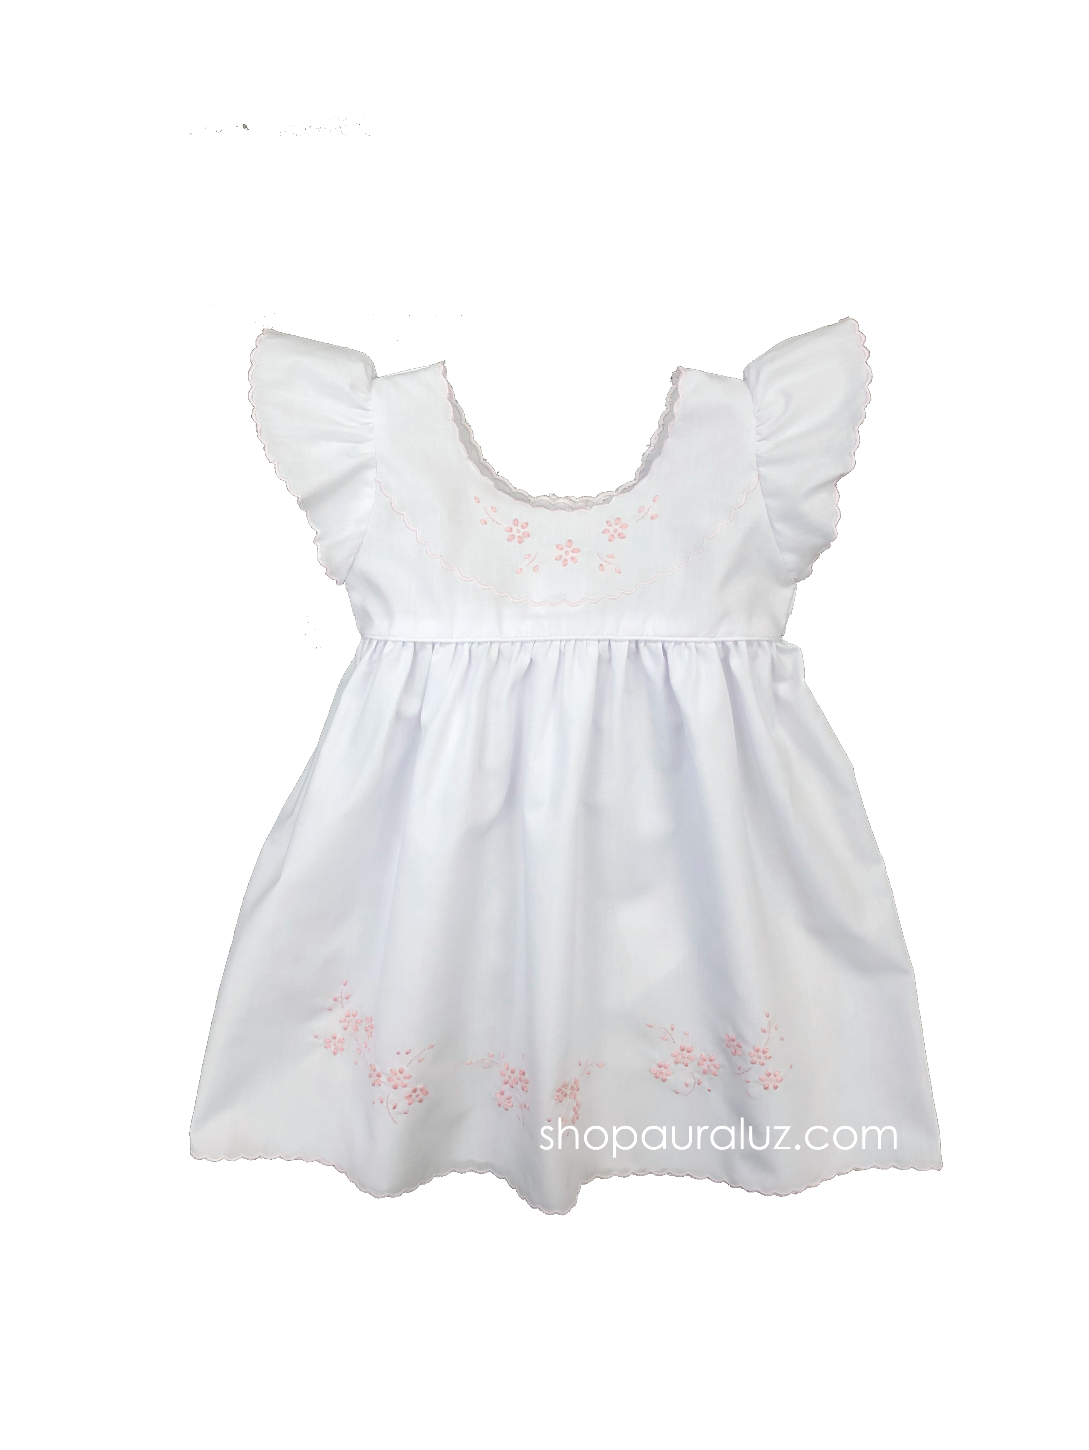 Auraluz Pinafore...White with embroidered flowers